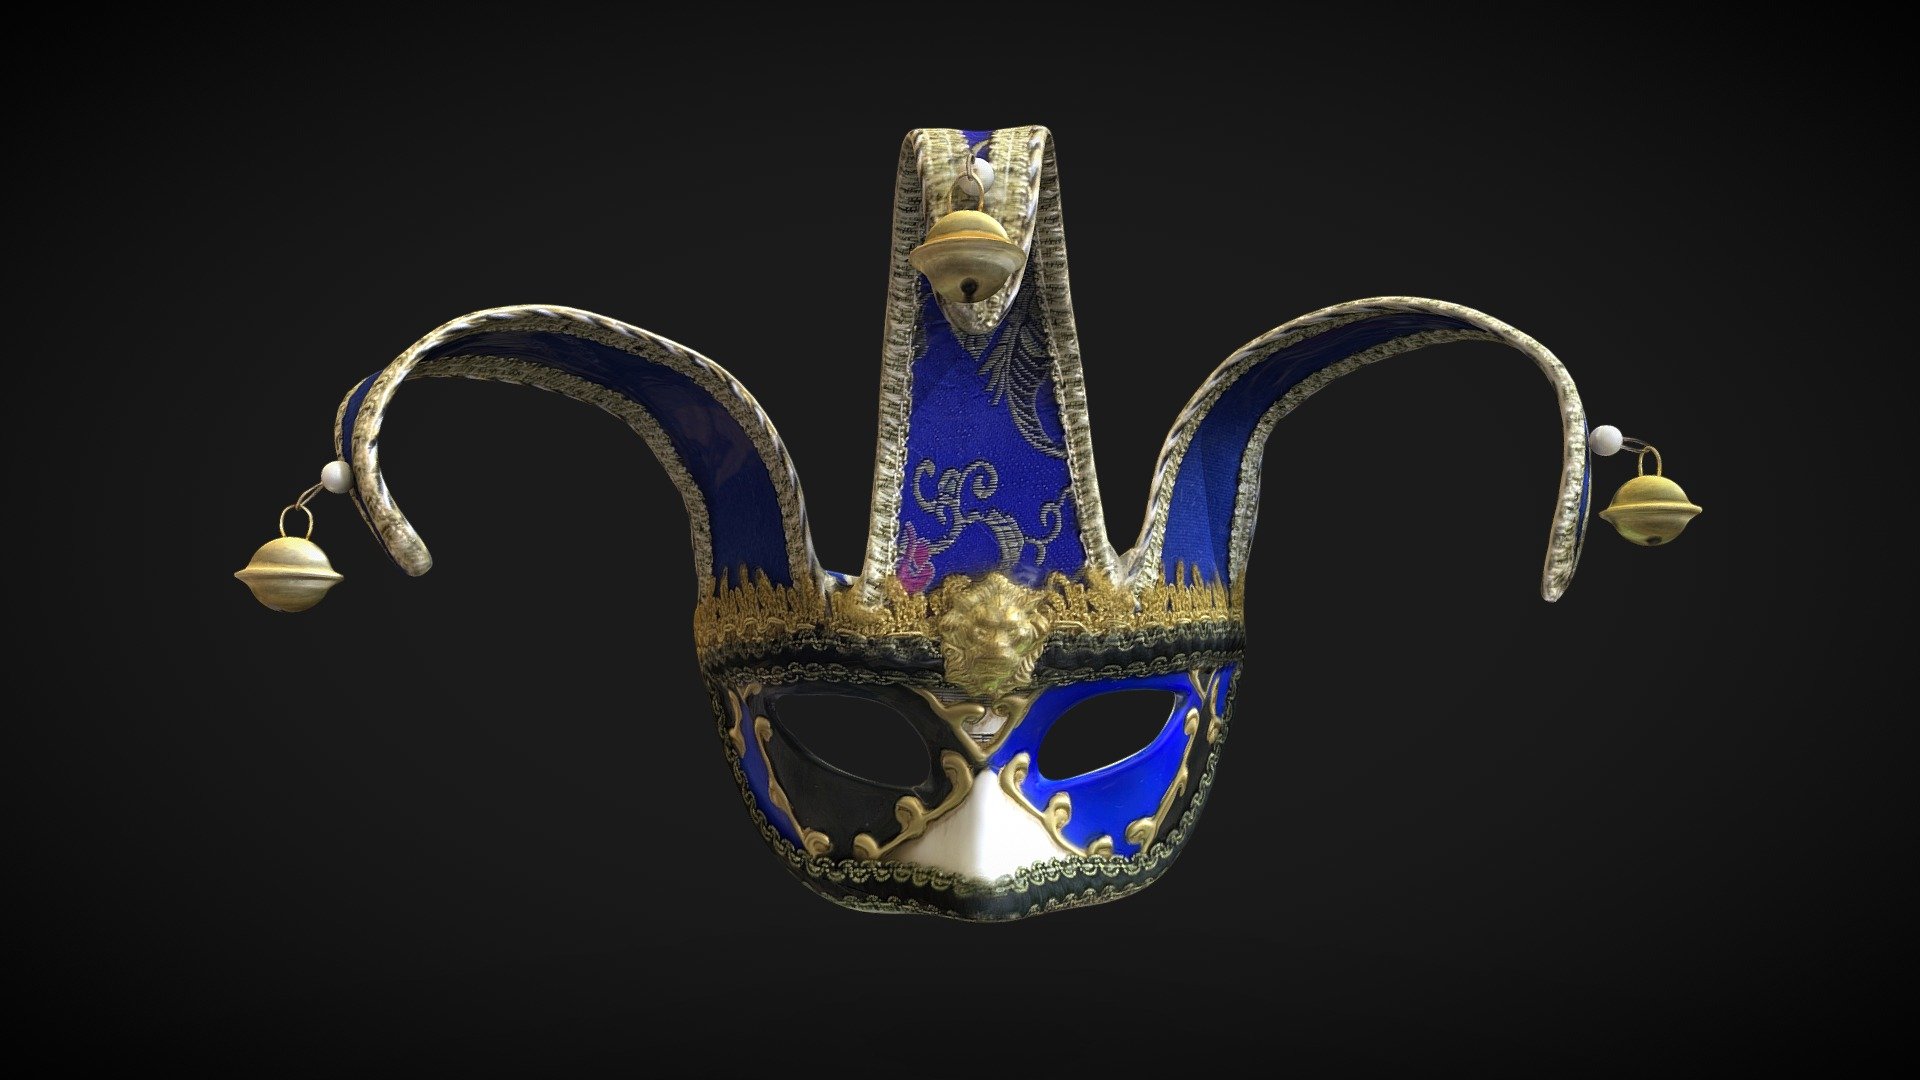 3D Scan with iPhone XS
250 images - Venetian Mask - 3D model by wboony 3d model